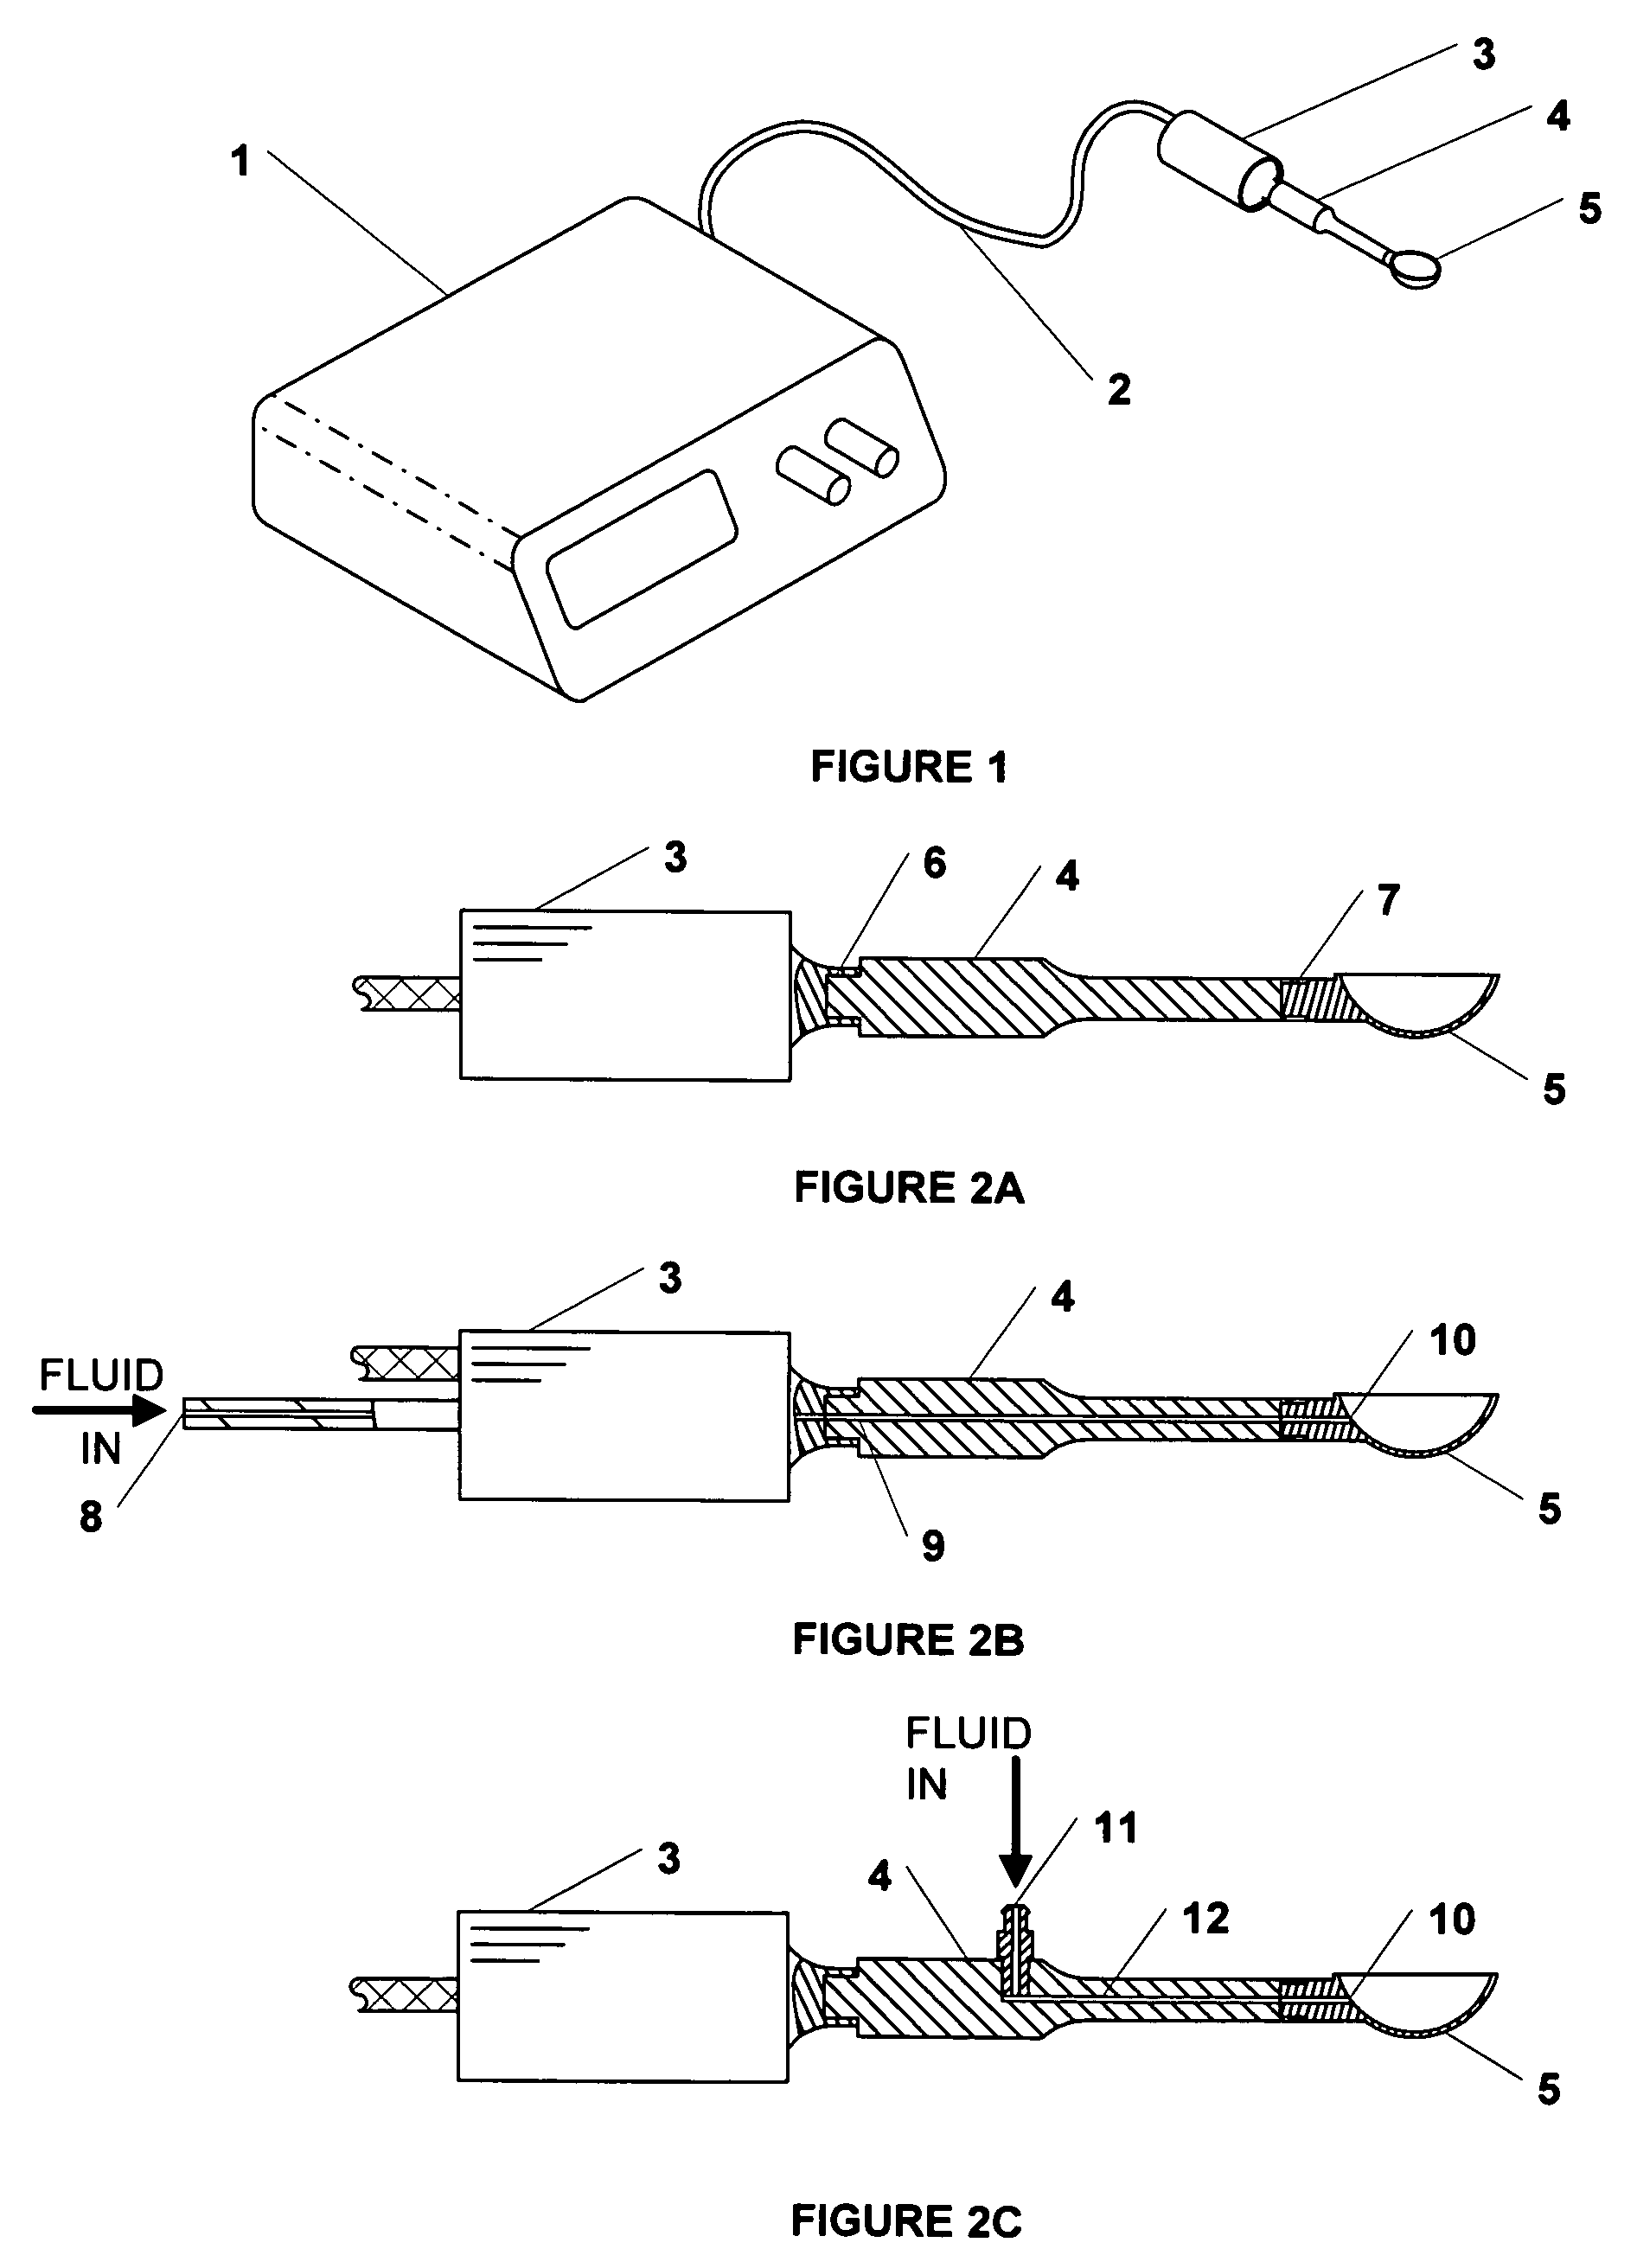 Apparatus and method for the treatment of tissue with ultrasound energy by direct contact